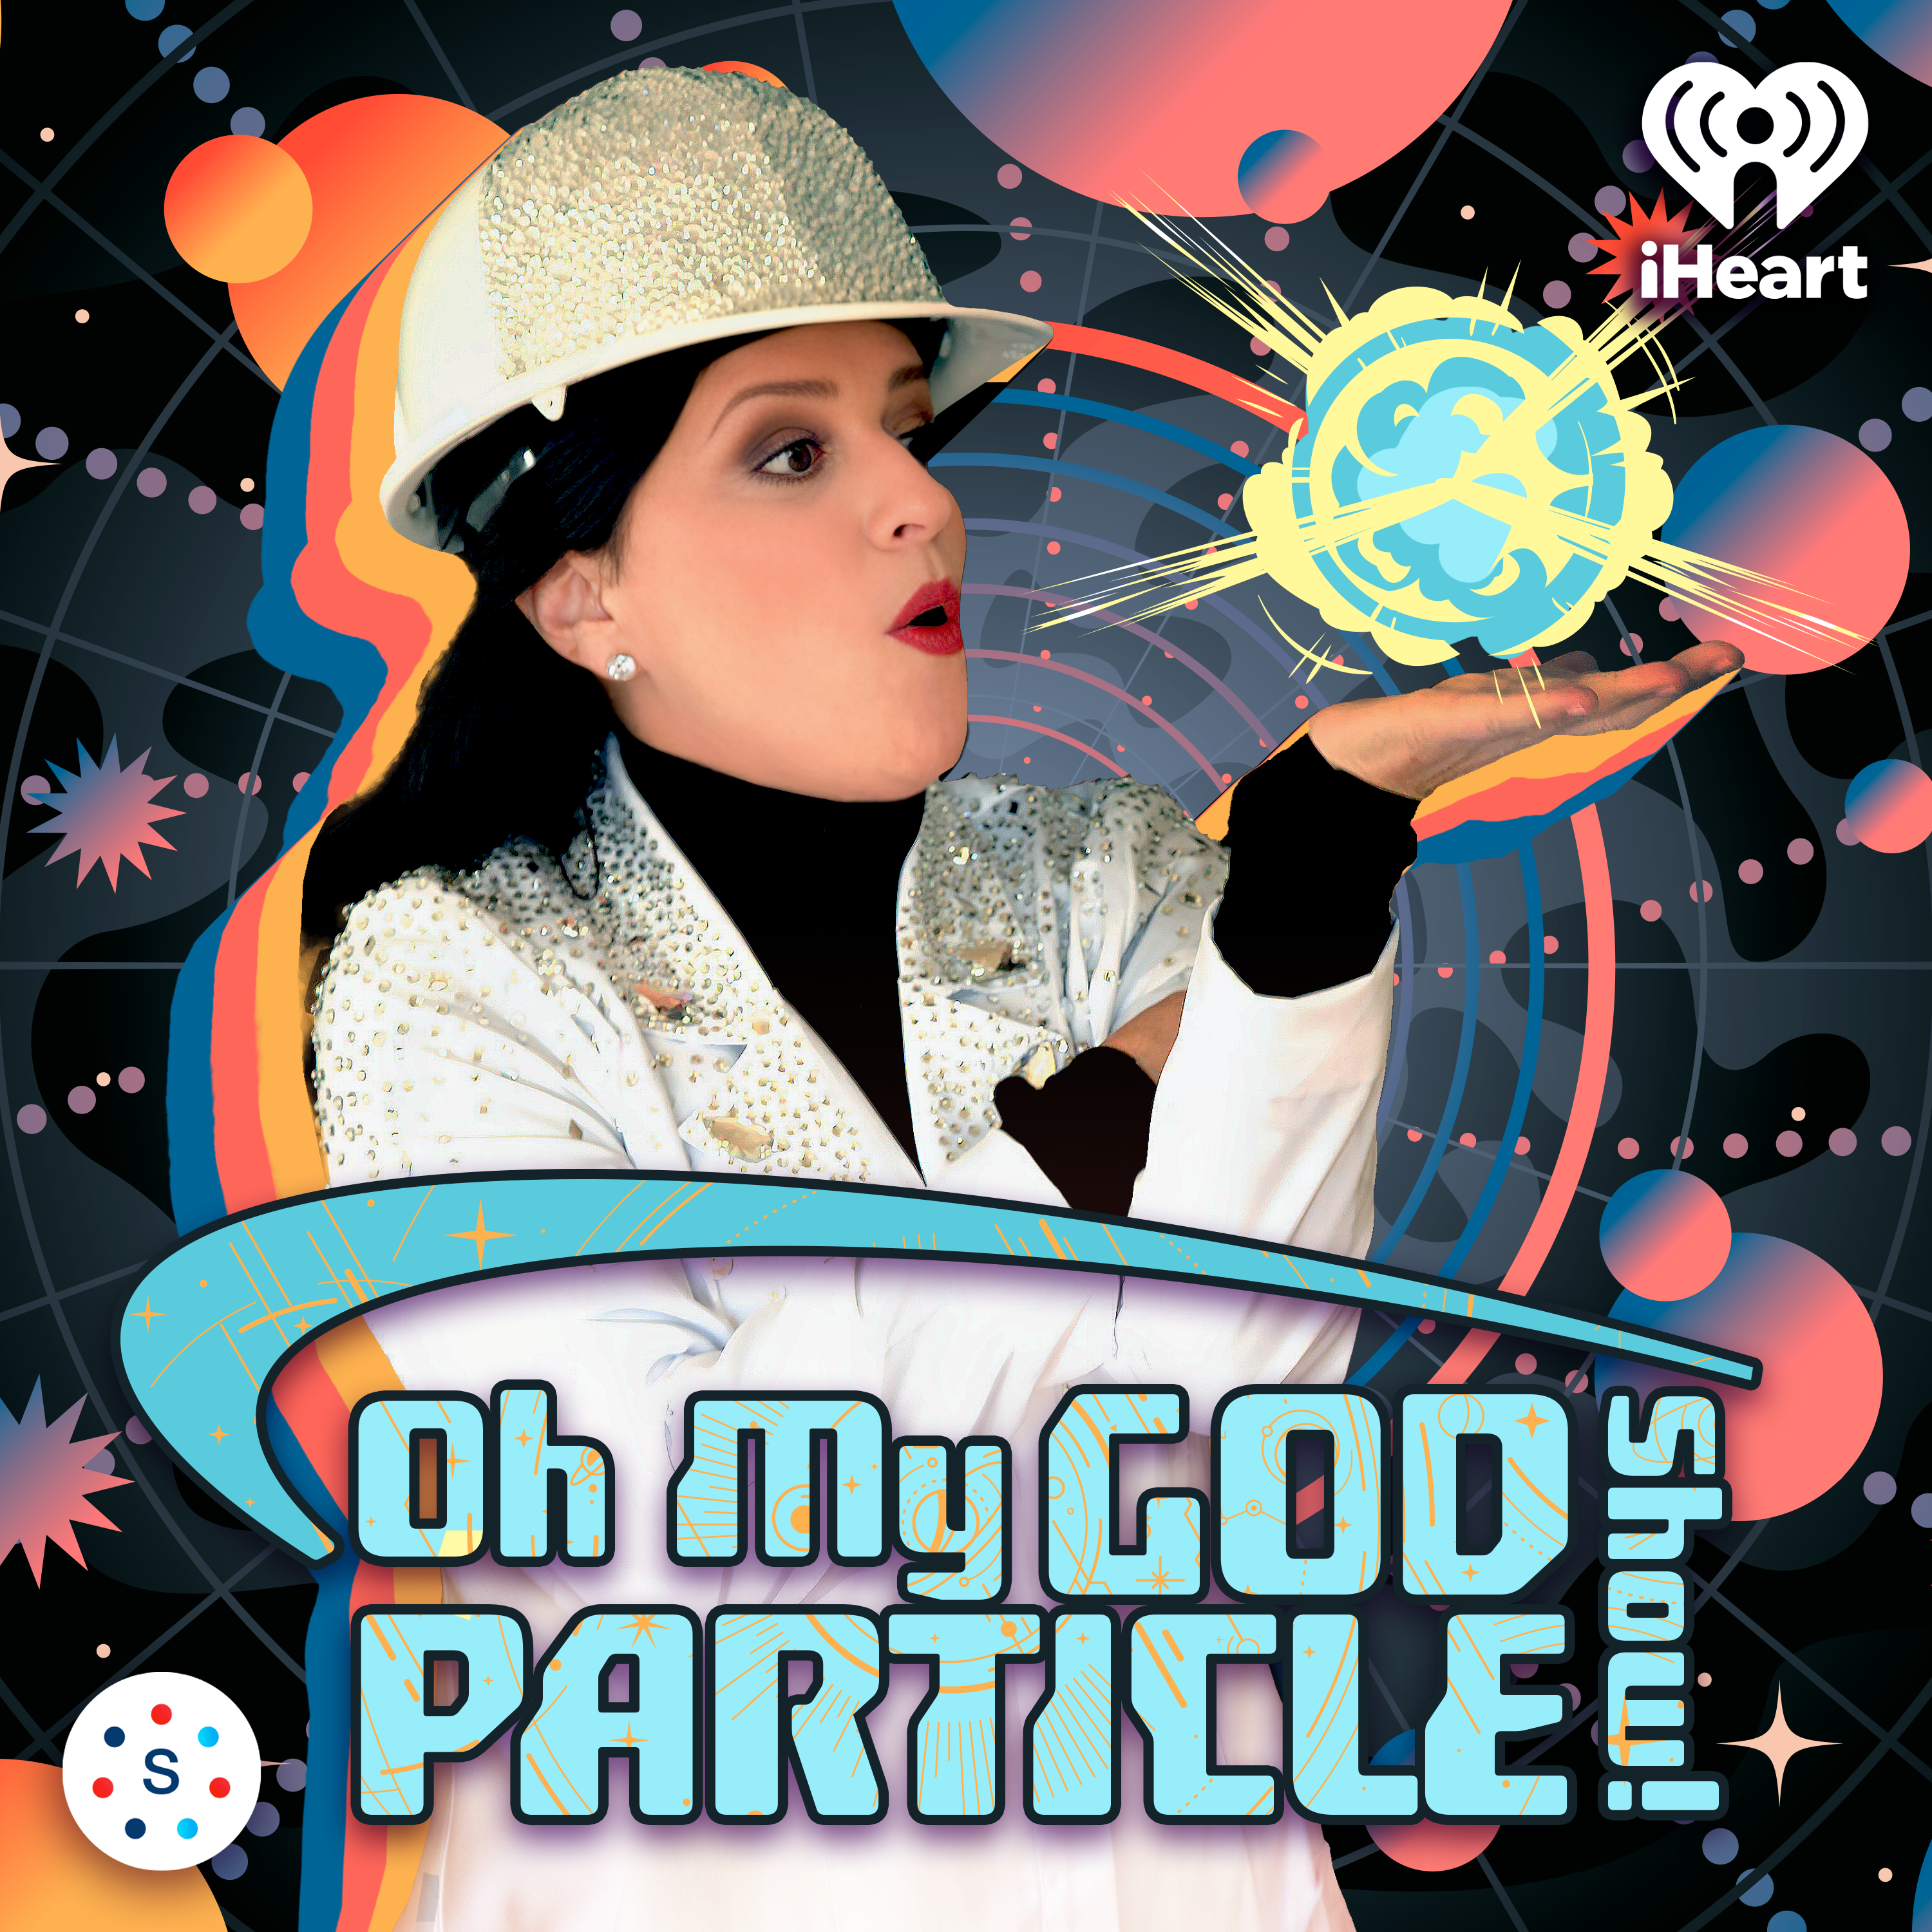 Introducing: Oh My God Particle Show!